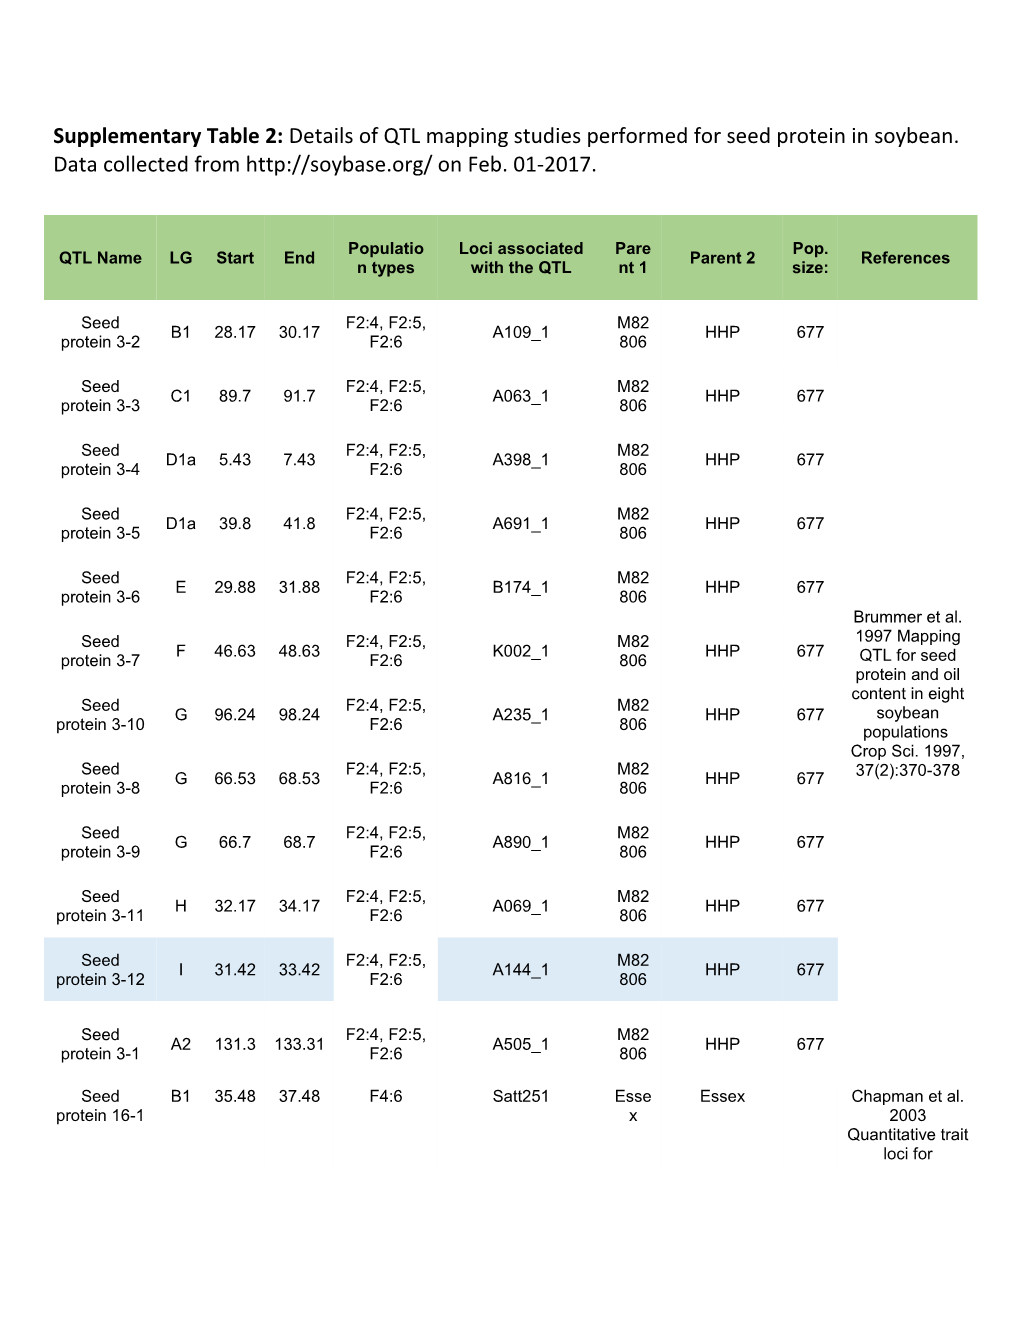 Supplementary Table 2: Details of QTL Mapping Studies Performed for Seed Protein in Soybean